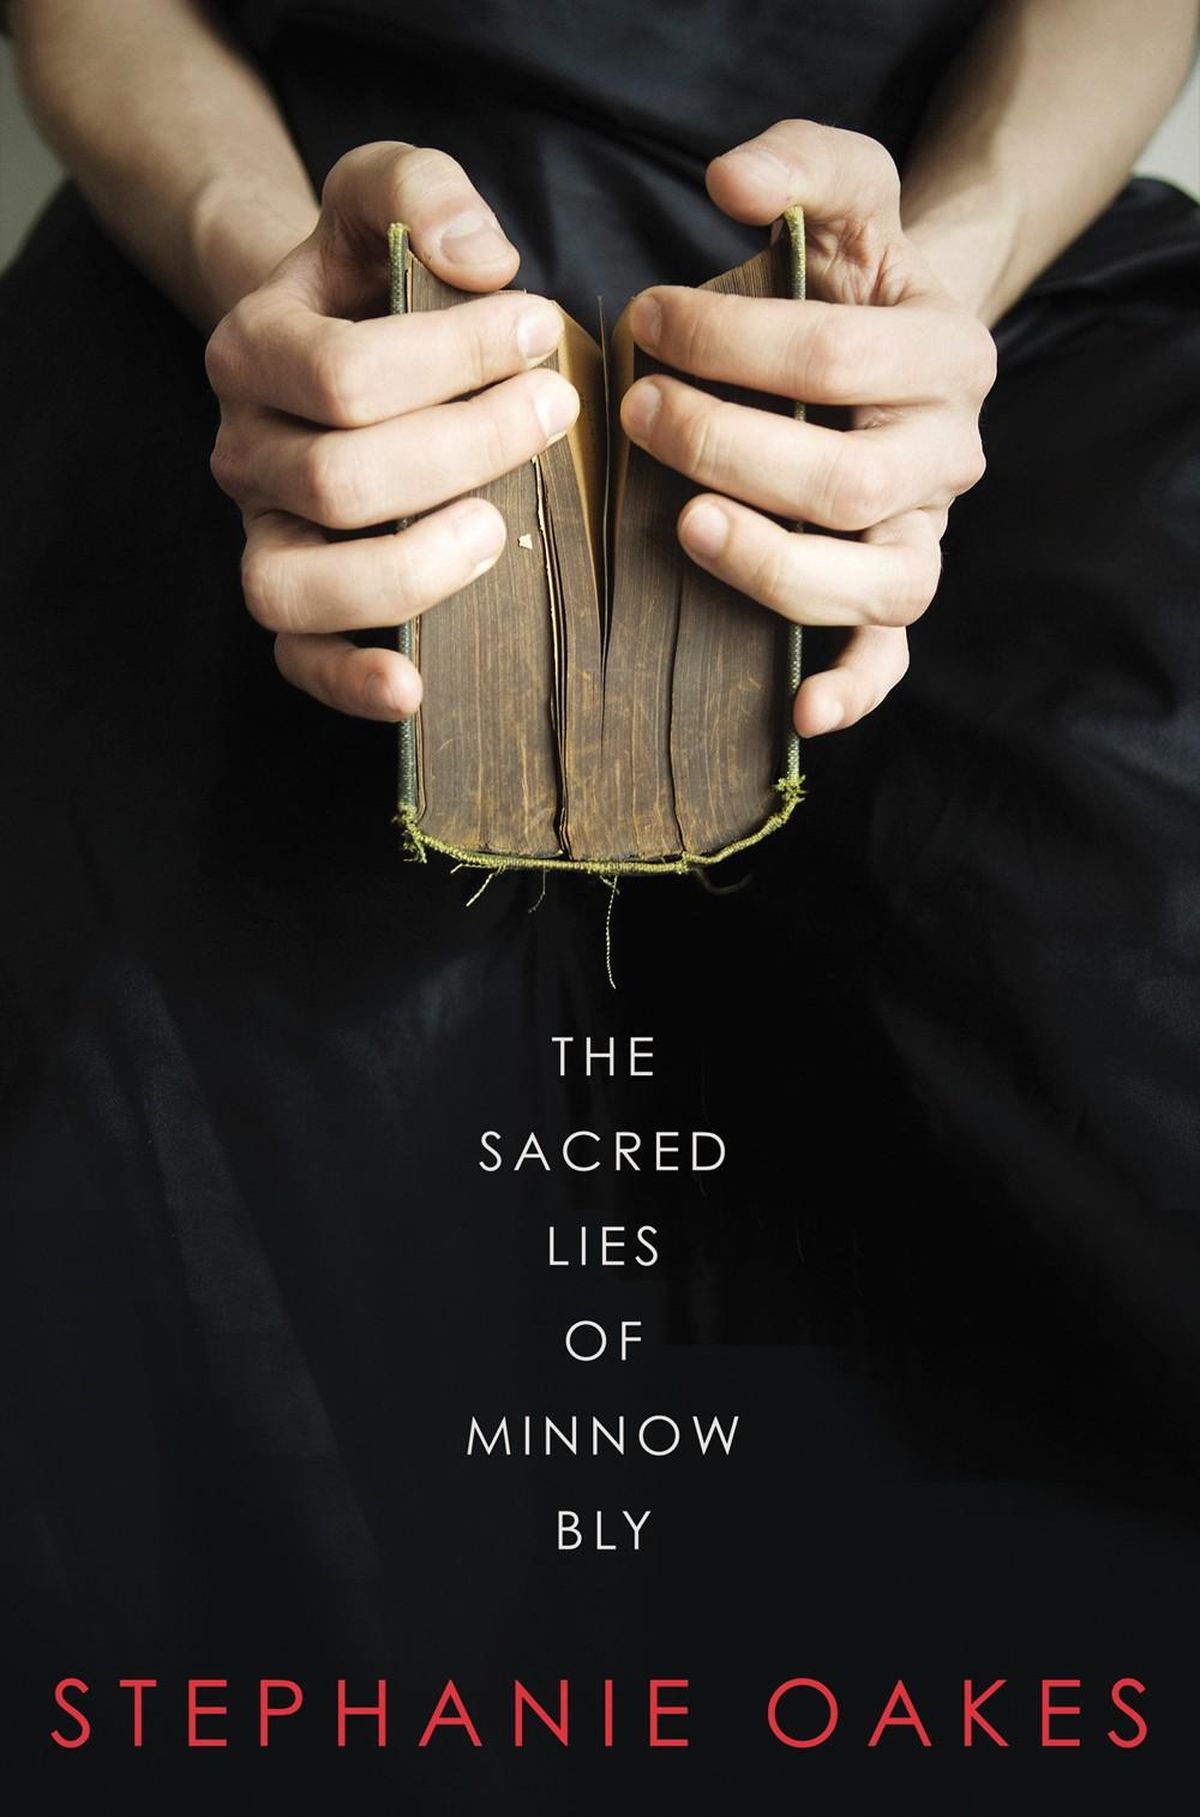 “The Sacred Lies of Minnow Bly,” by Stephanie Oakes of Spokane, was released by Dial Books in 2015.